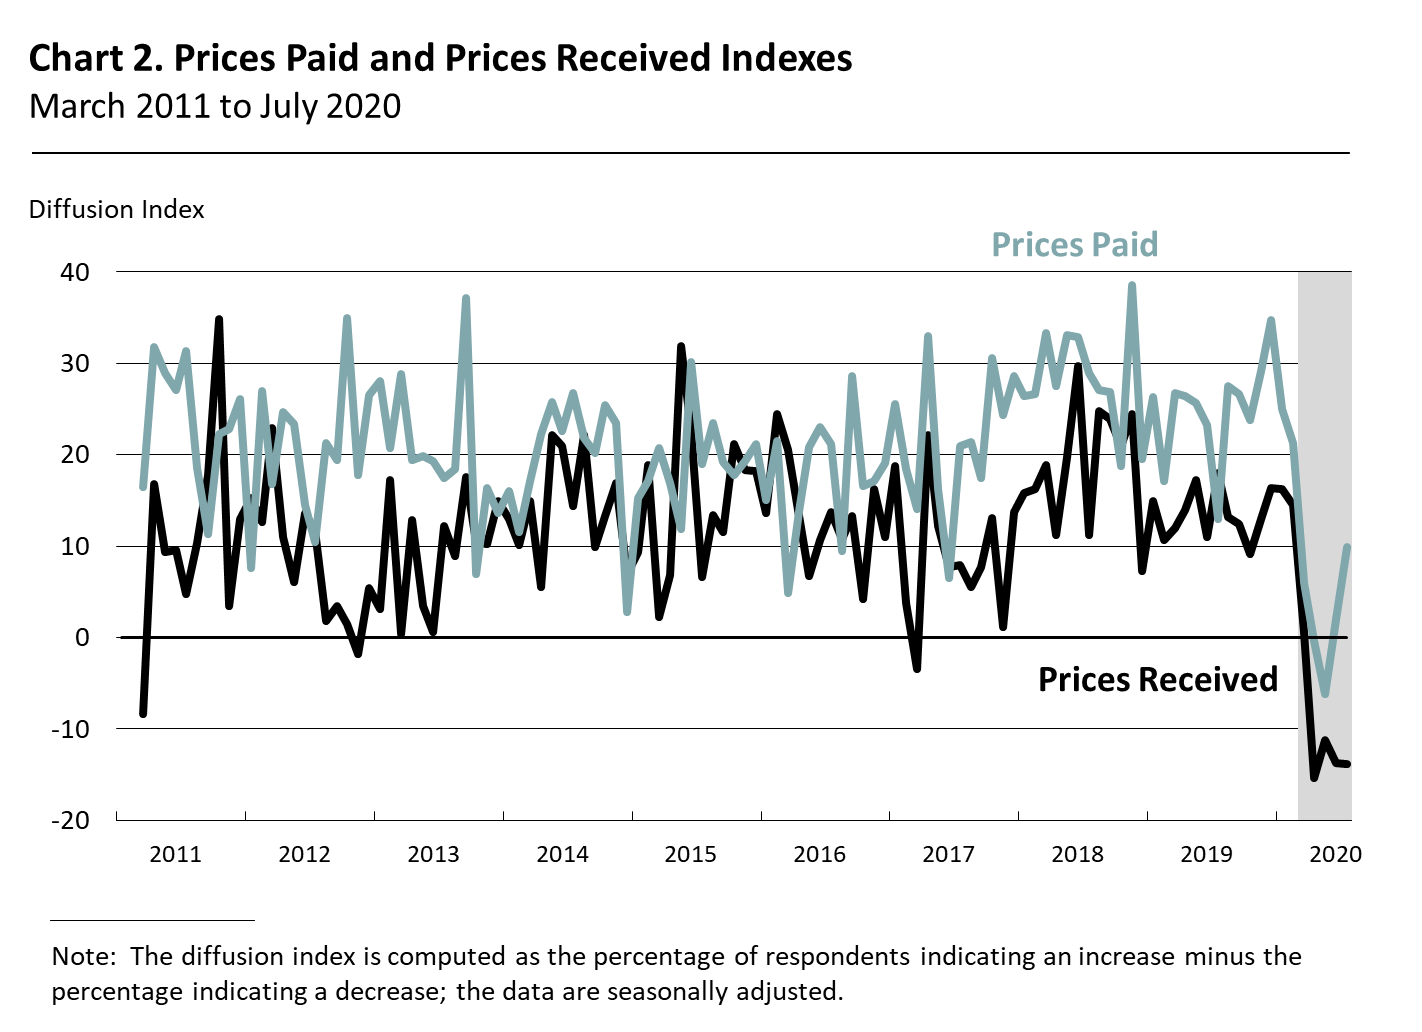 Prices Paid and Prices Received Indexes